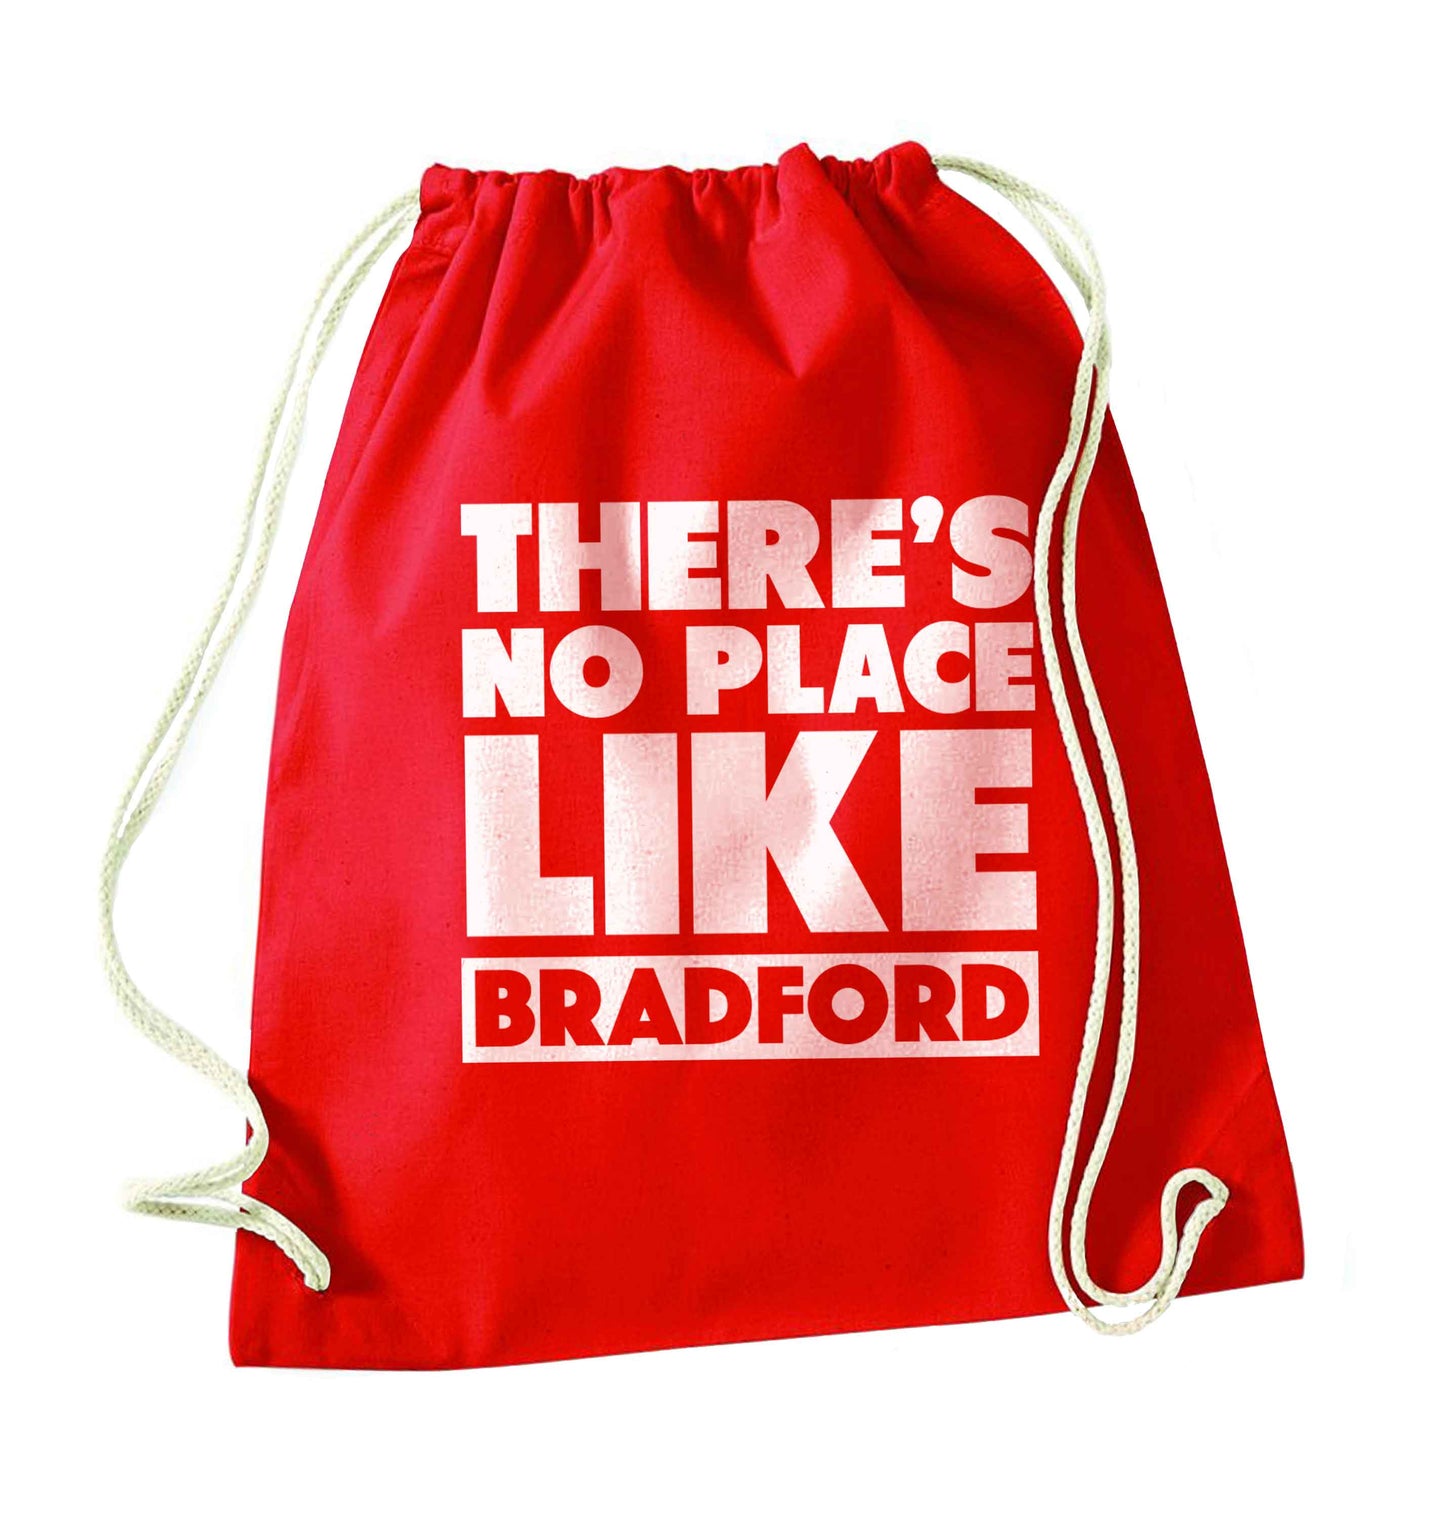 There's no place like Bradford red drawstring bag 